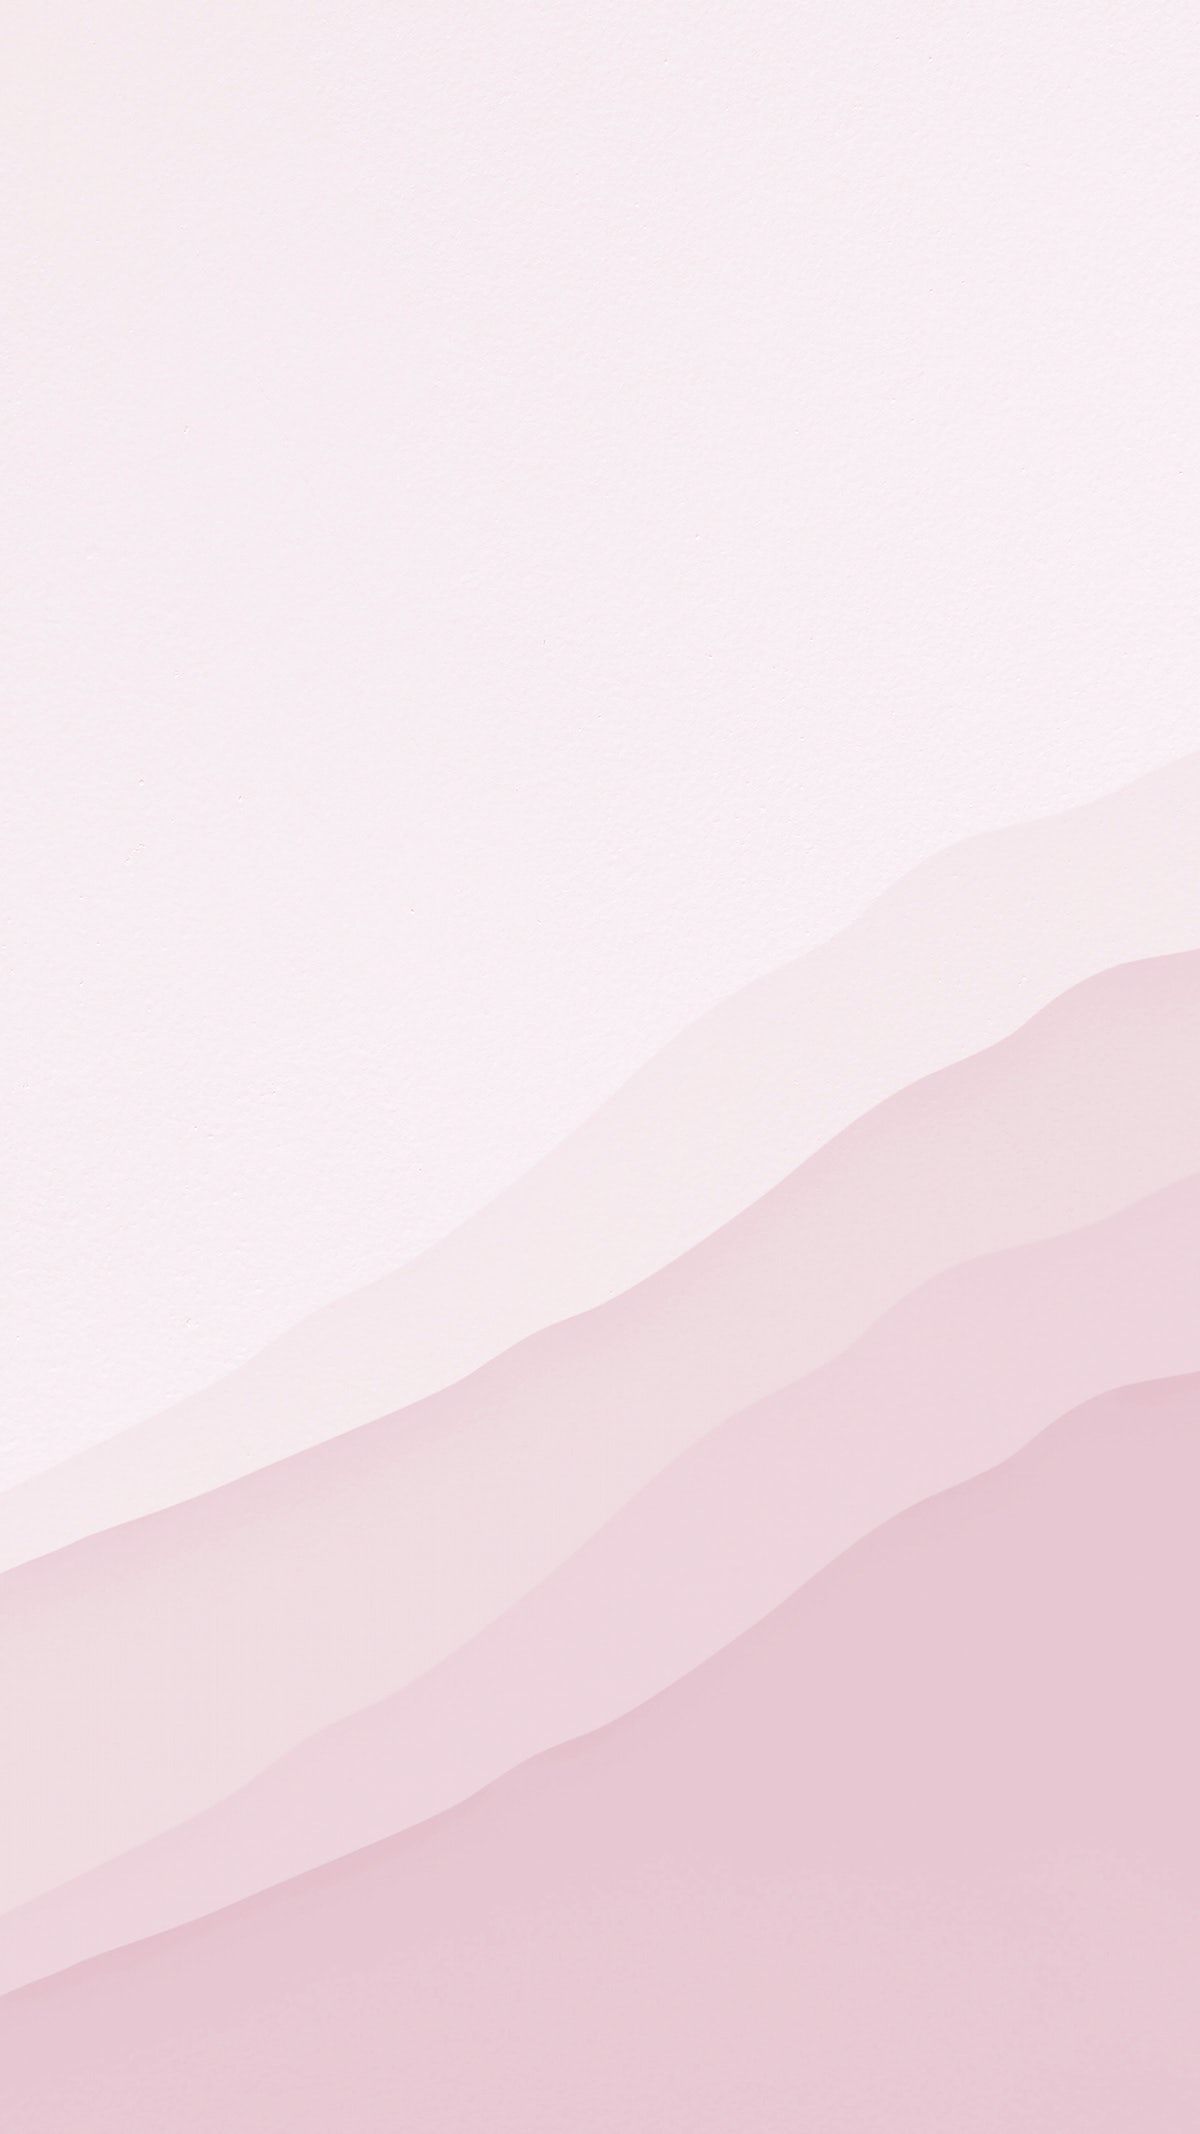 Abstract background light pink wallpaper image. free image / nunny. Pink wallpaper background, Pink wallpaper iphone, Pink wallpaper